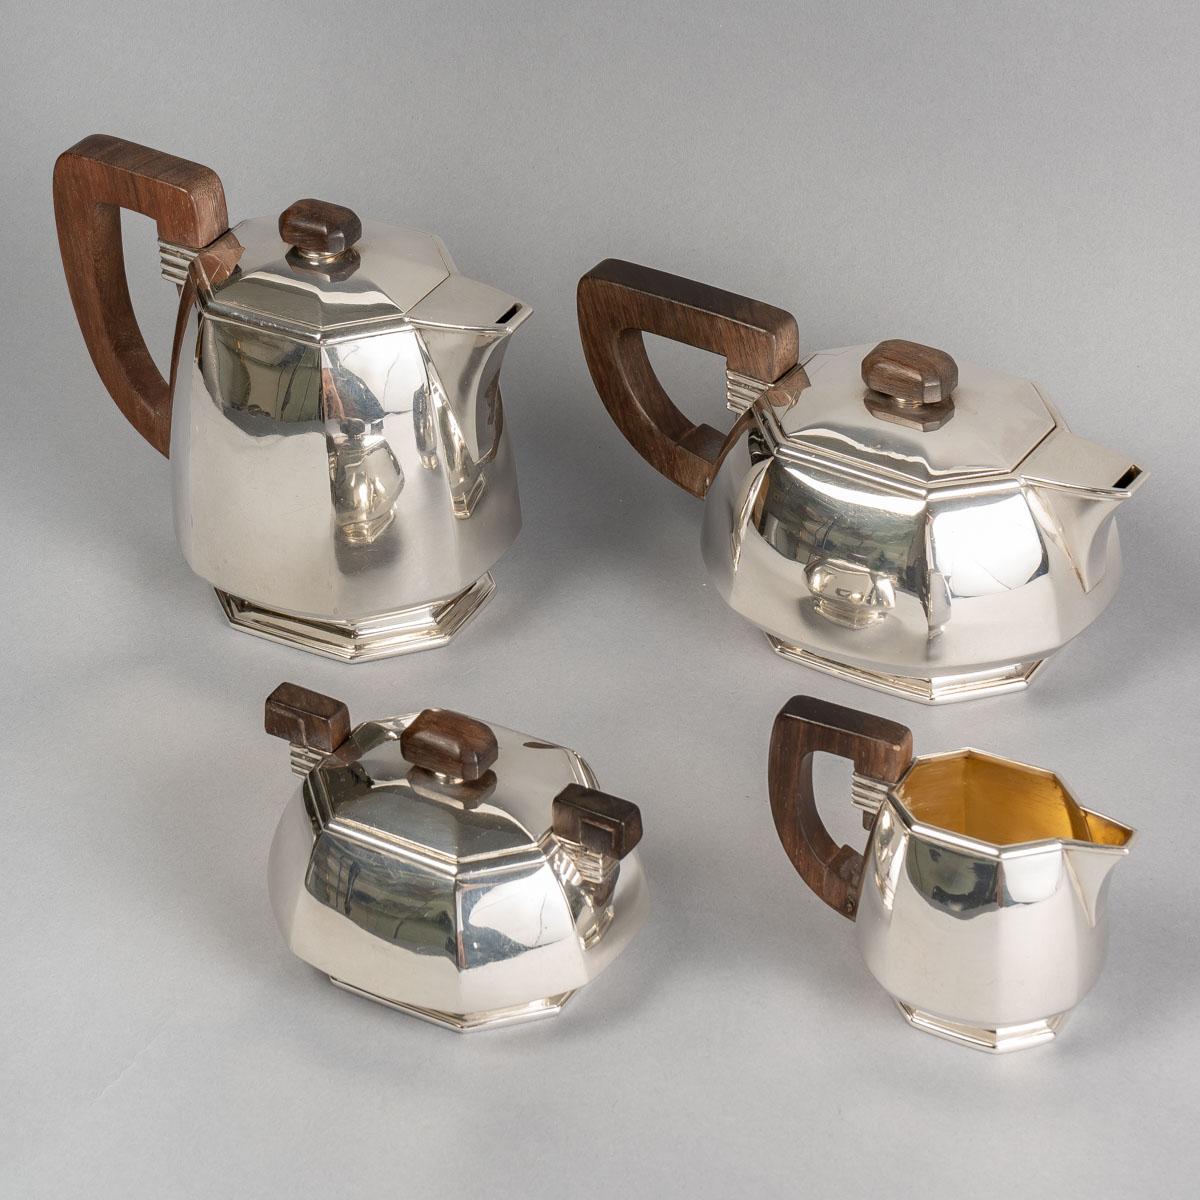 Art Deco Modernist tea and coffee service with cut sides in sterling pure silver and rosewood sockets by Puiforcat created in the 1930s.

Service comprising:
- a coffe pot of 16 cm x 19 cm 
-  a teapot of 11,5 cm x 22,5 cm 
- a milkpot of 10 cm x 12